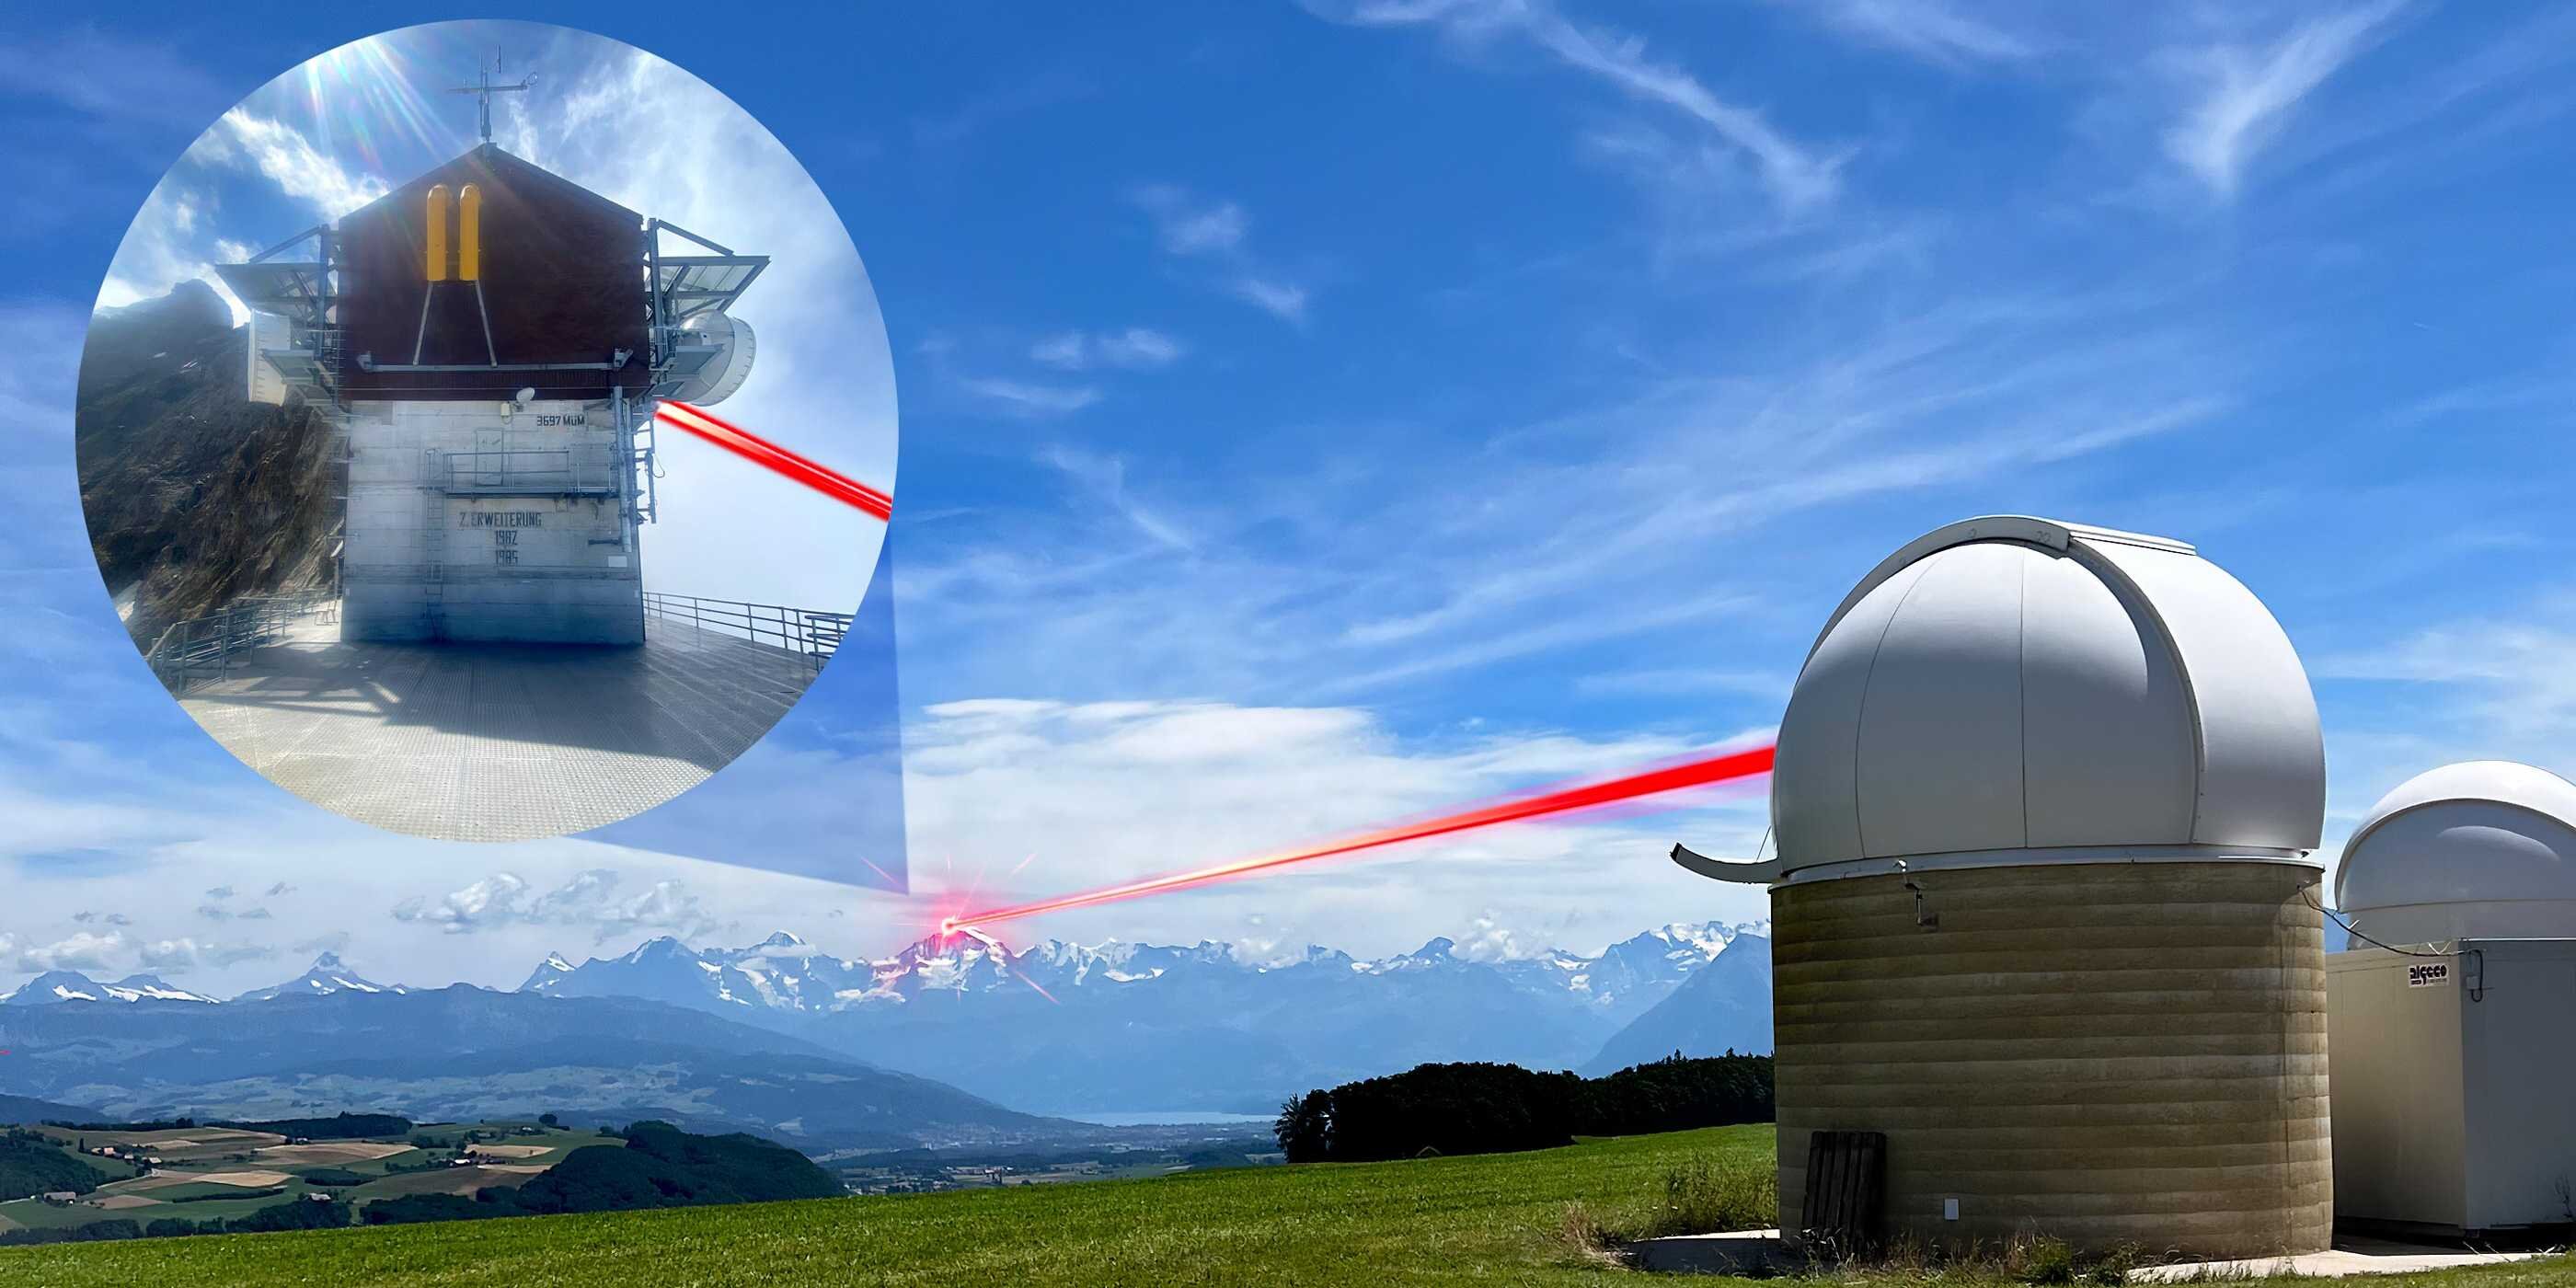 Lasers enable internet backbone via satellite, may soon eliminate need for deep-sea cables